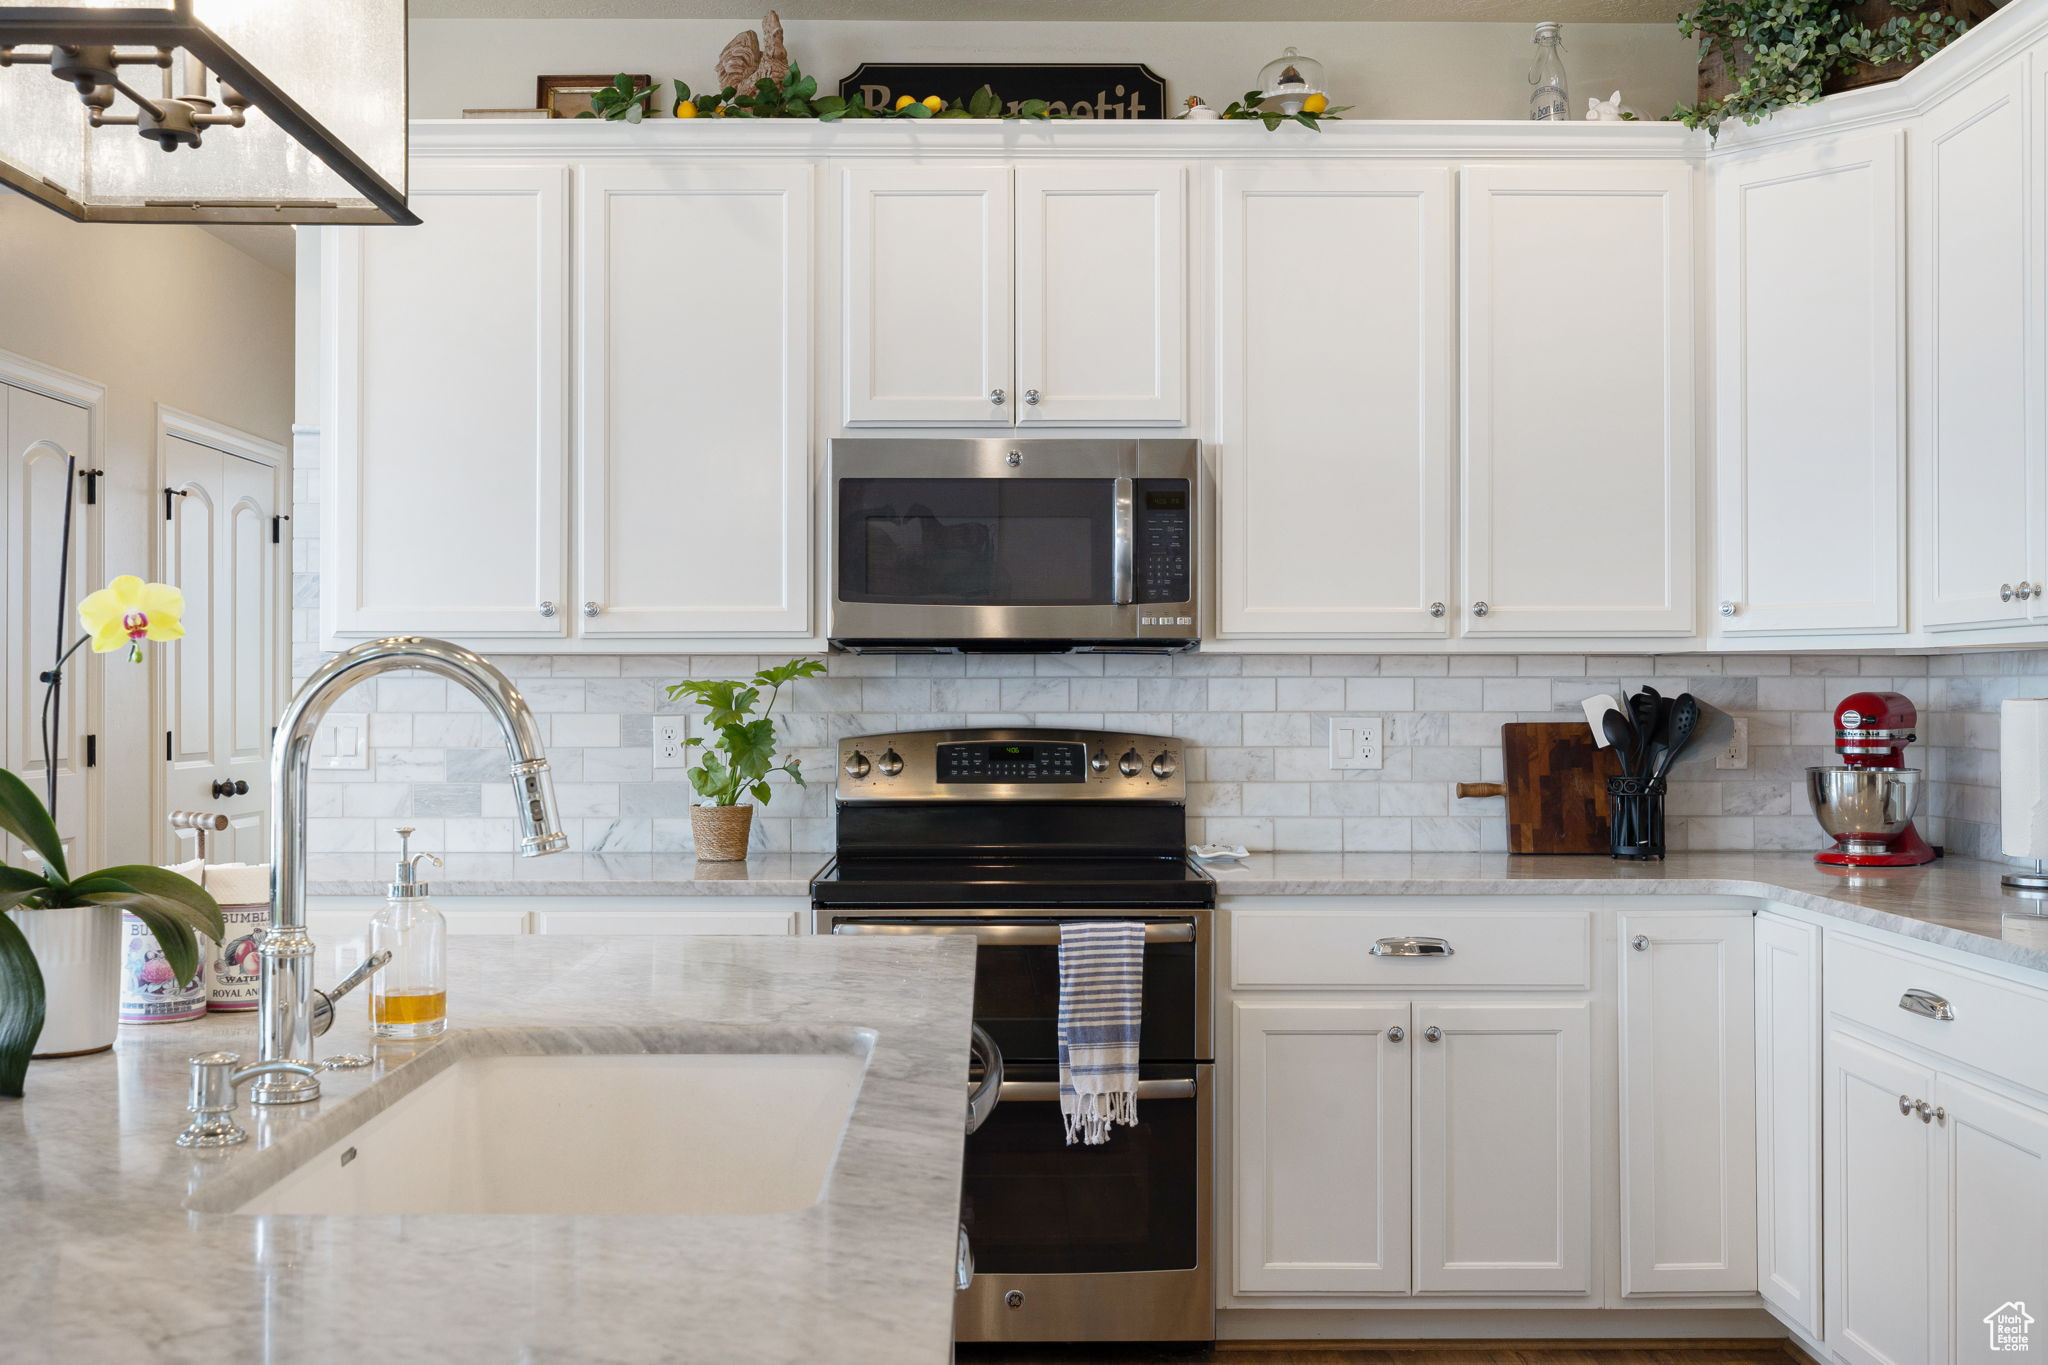 Kitchen featuring white cabinetry, backsplash, appliances with stainless steel finishes, sink, and light stone counters